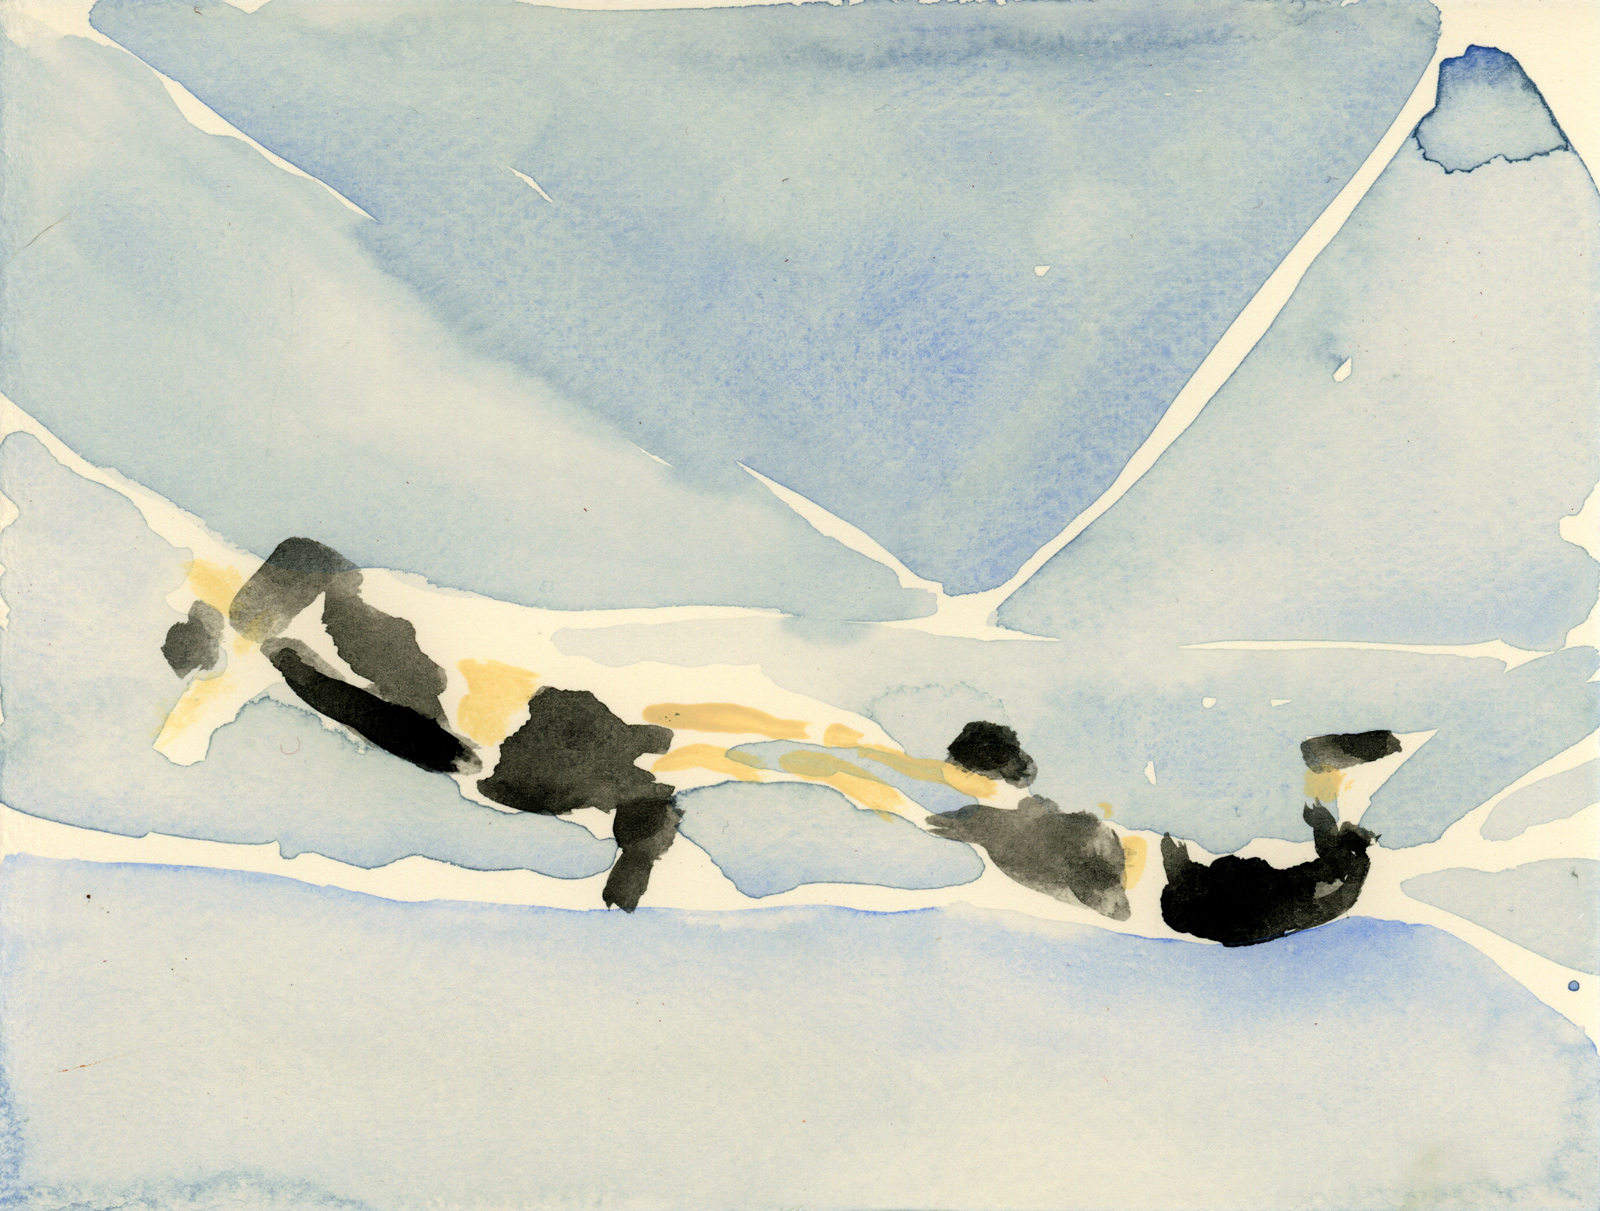 Watercolor painting of trapeze artists